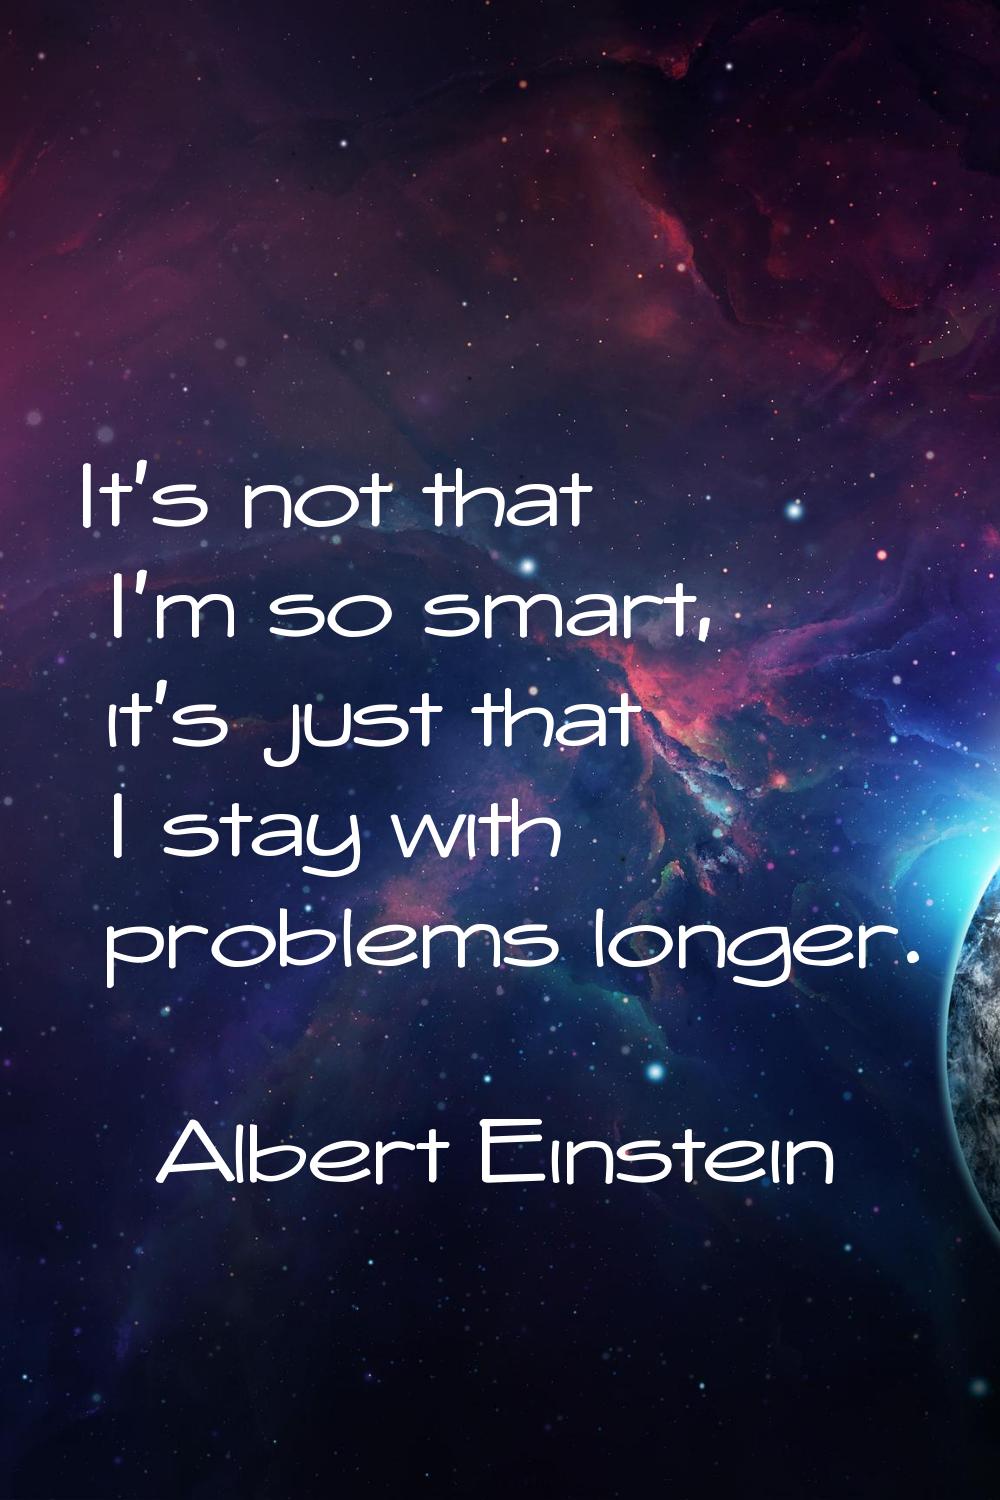 It's not that I'm so smart, it's just that I stay with problems longer.